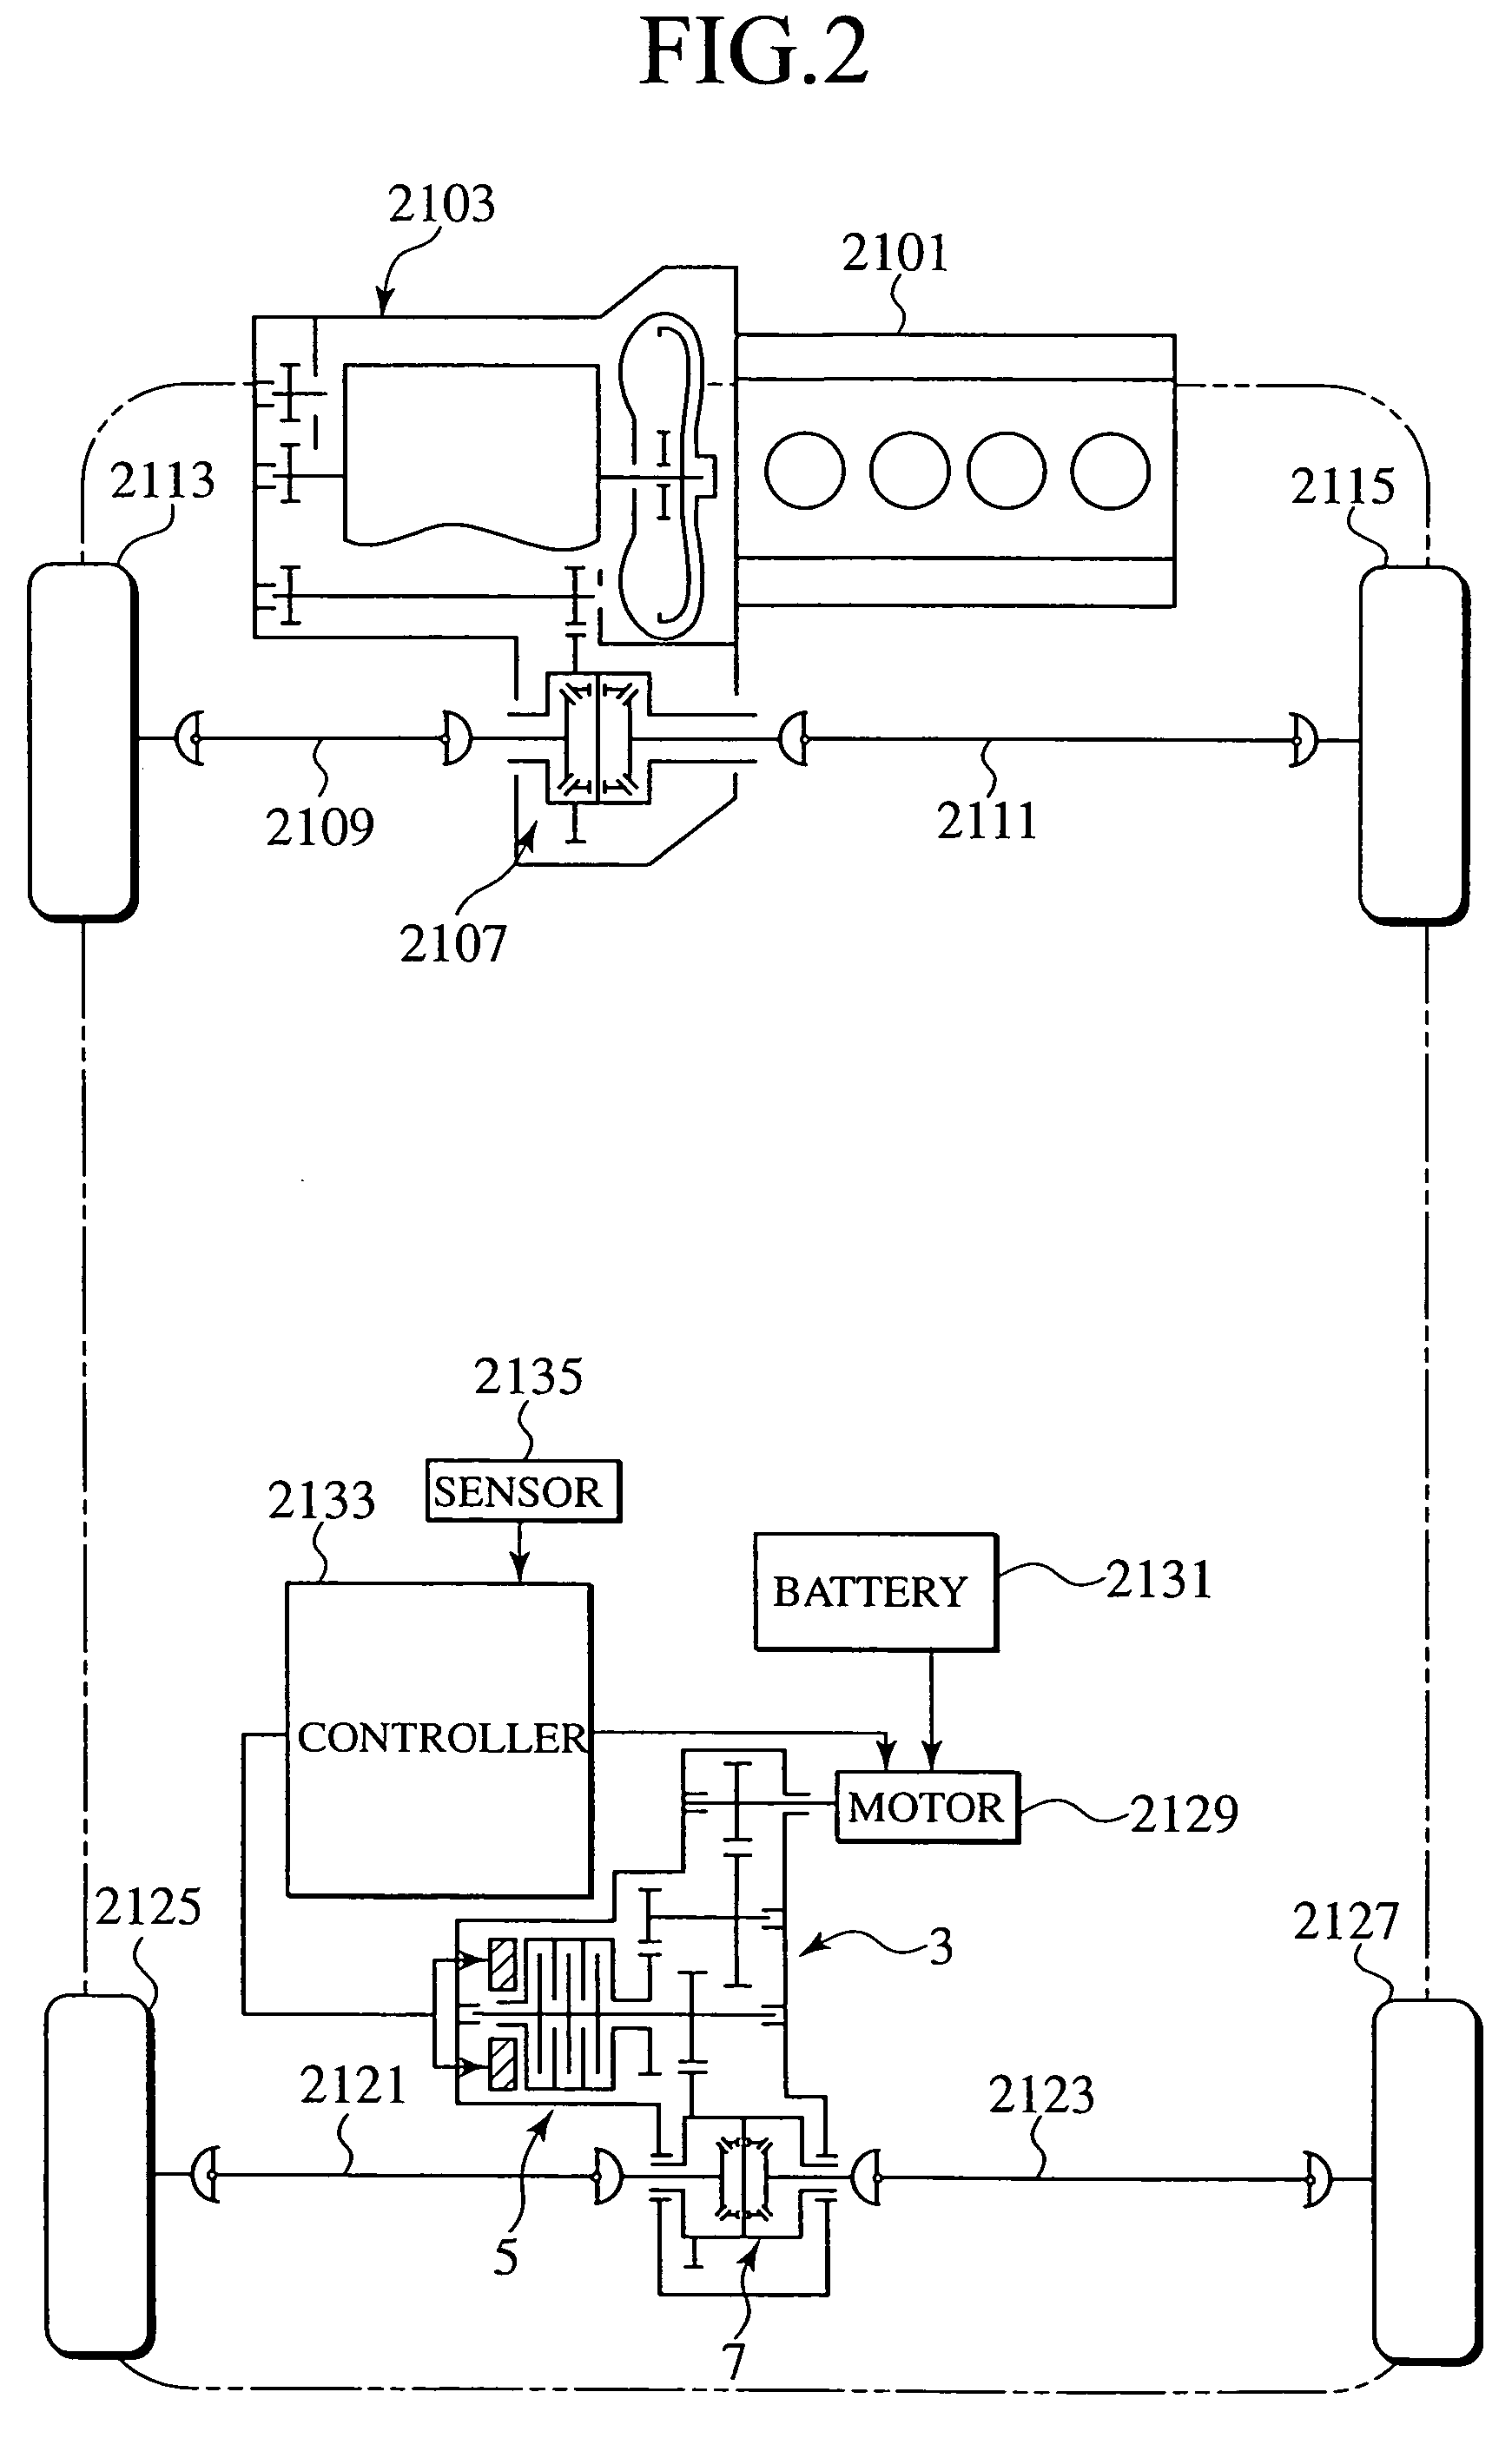 Power transmission system and operation method therefor